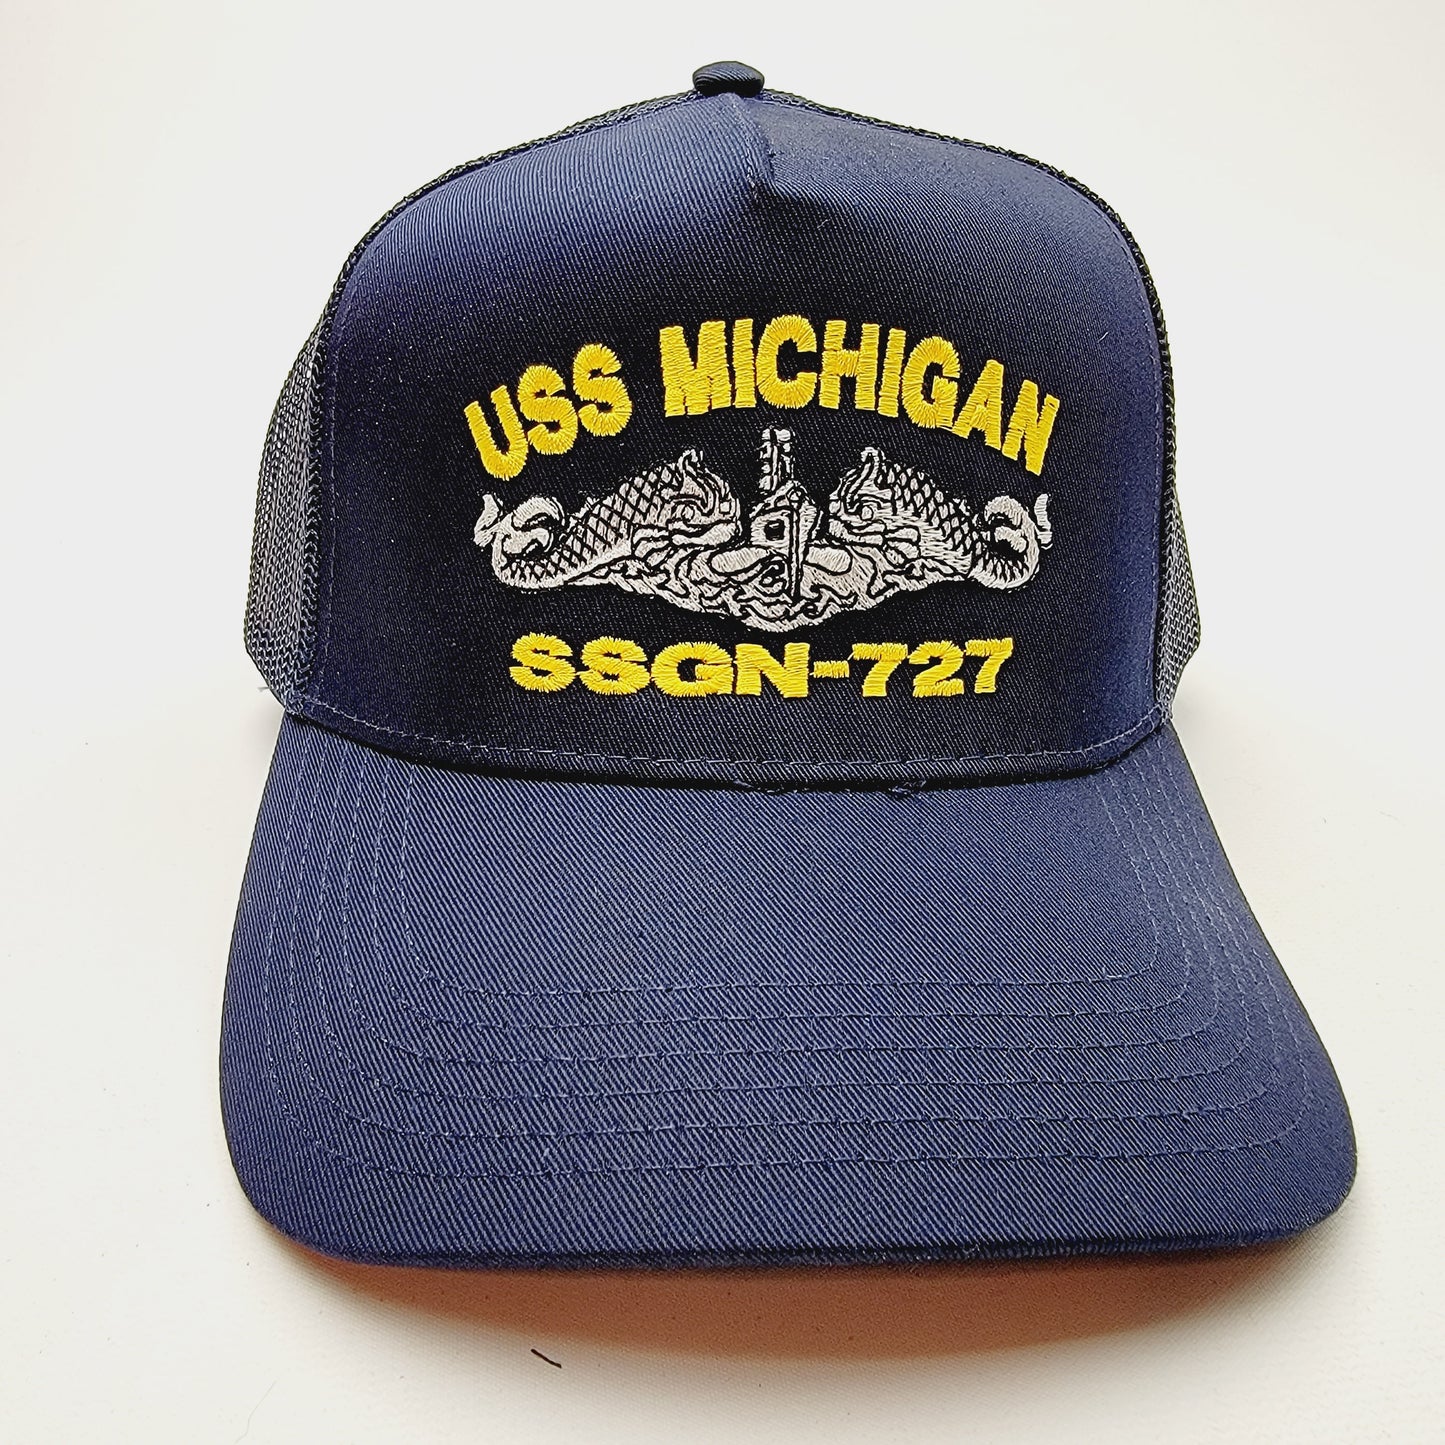 US NAVY USS MICHIGAN SSGN-727 Embroidered Hat Baseball Cap Adjustable Blue